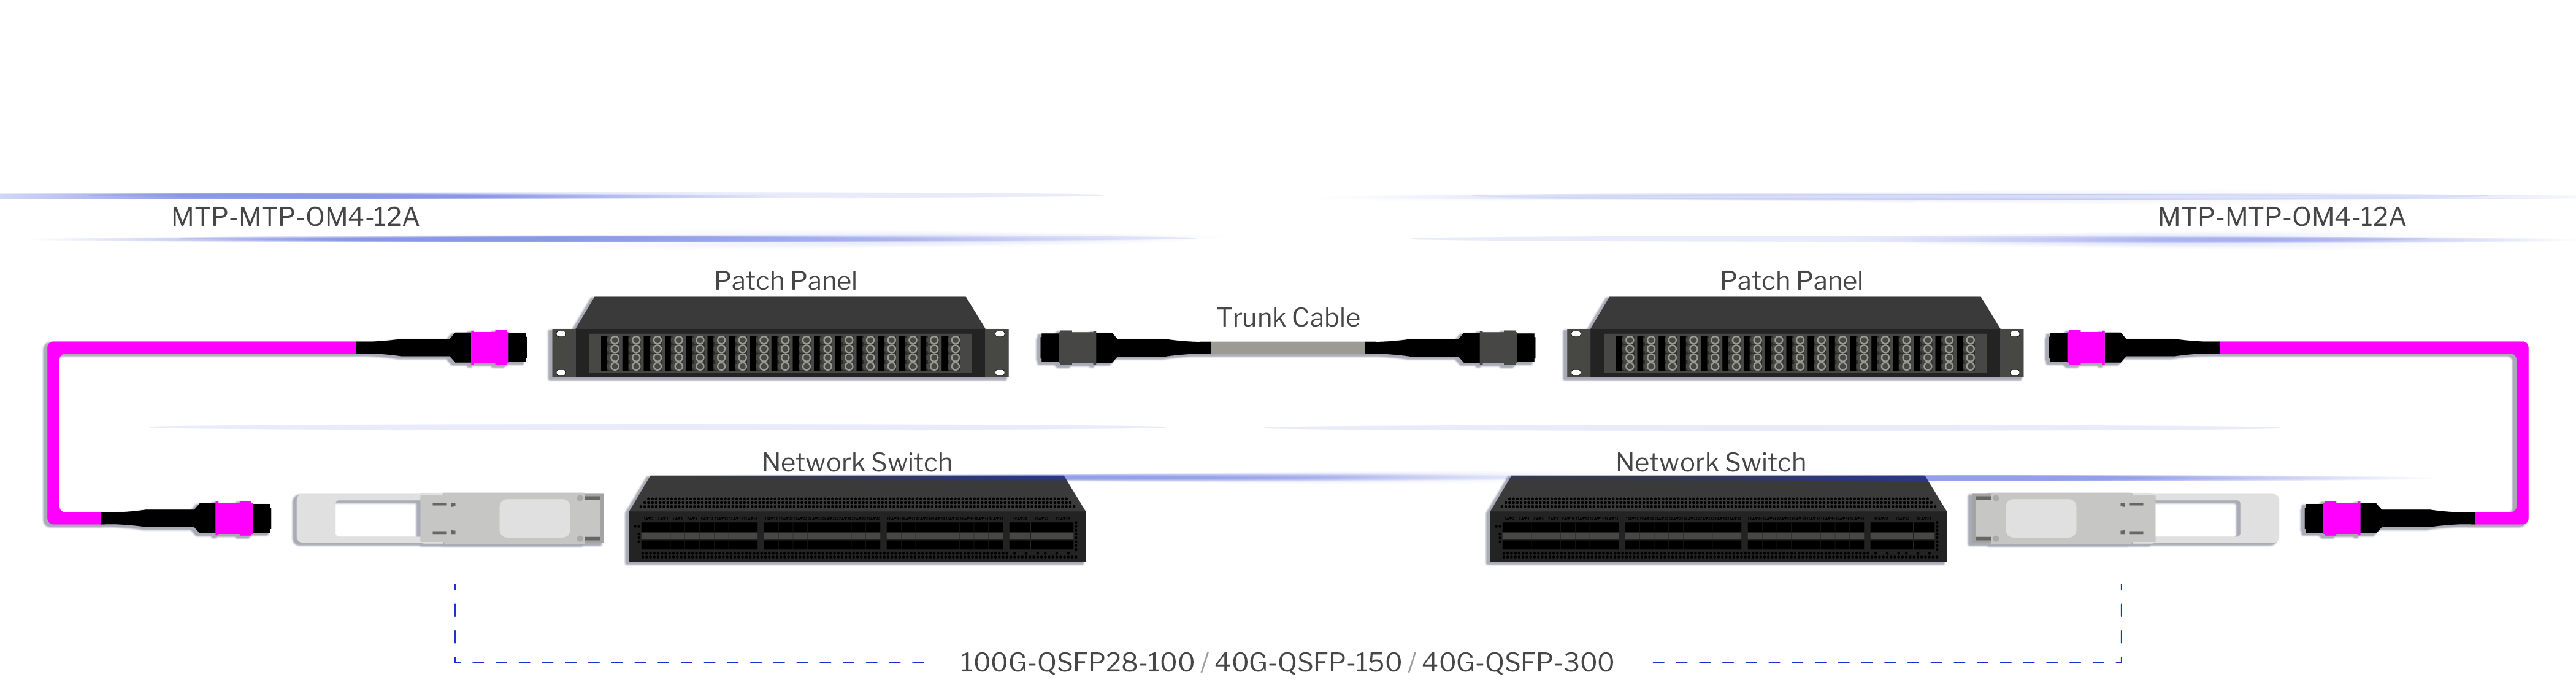 MTP-MTP-OM4-12A Patch Cable Connectivity Solution